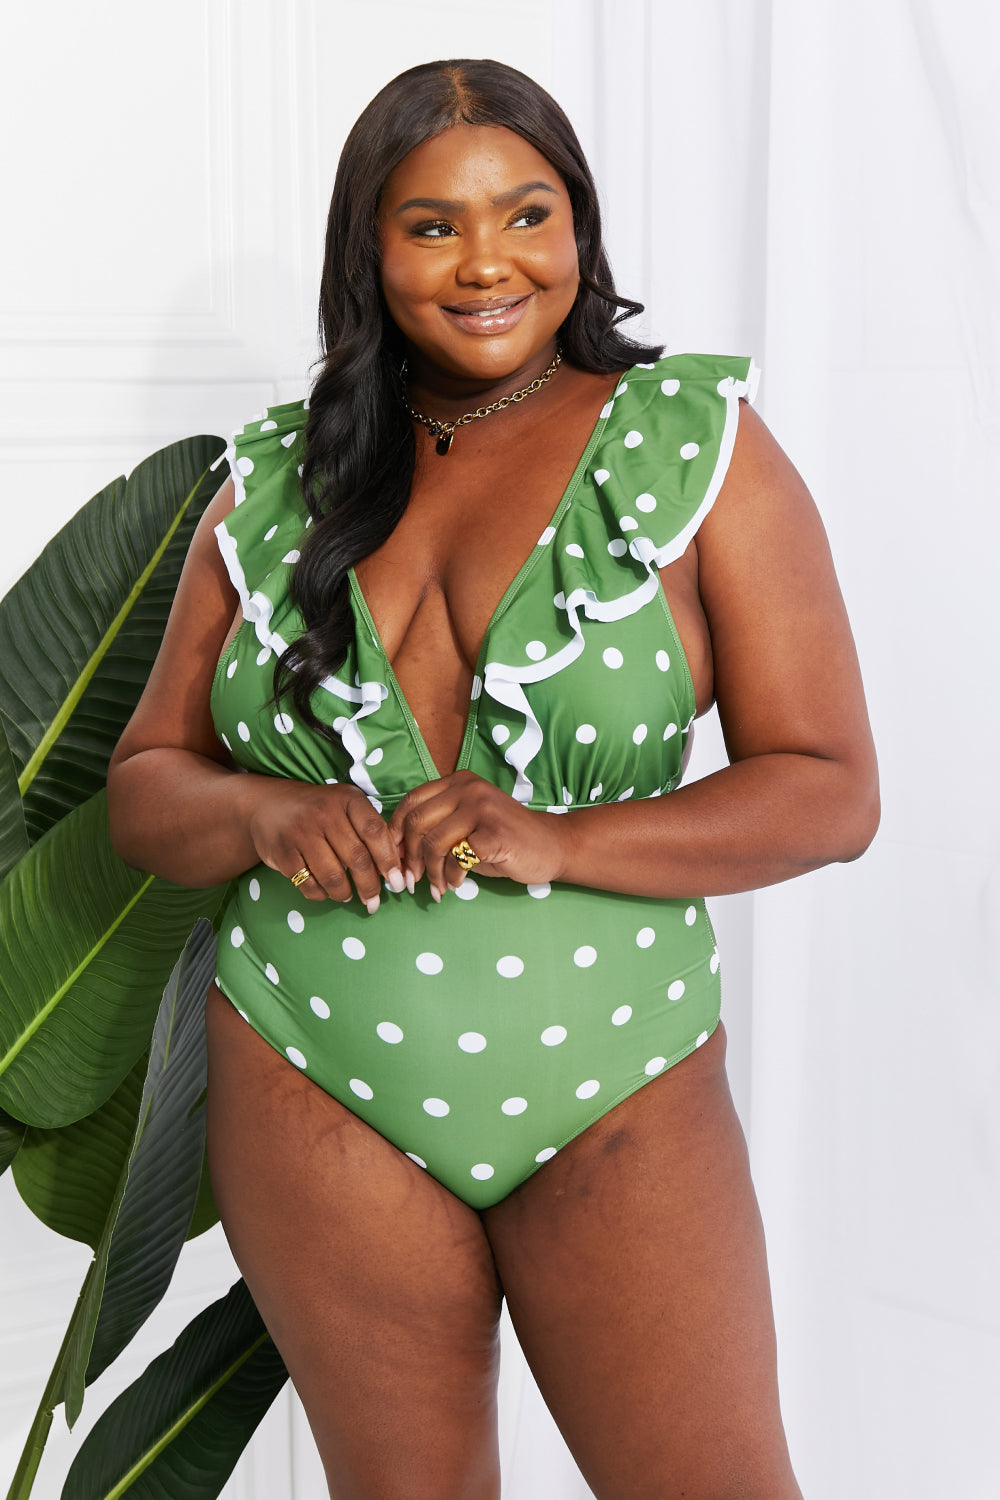 Moonlit Dip Ruffle Plunge Swimsuit in Mid Green by BYNES NEW YORK | Apparel & Accessories